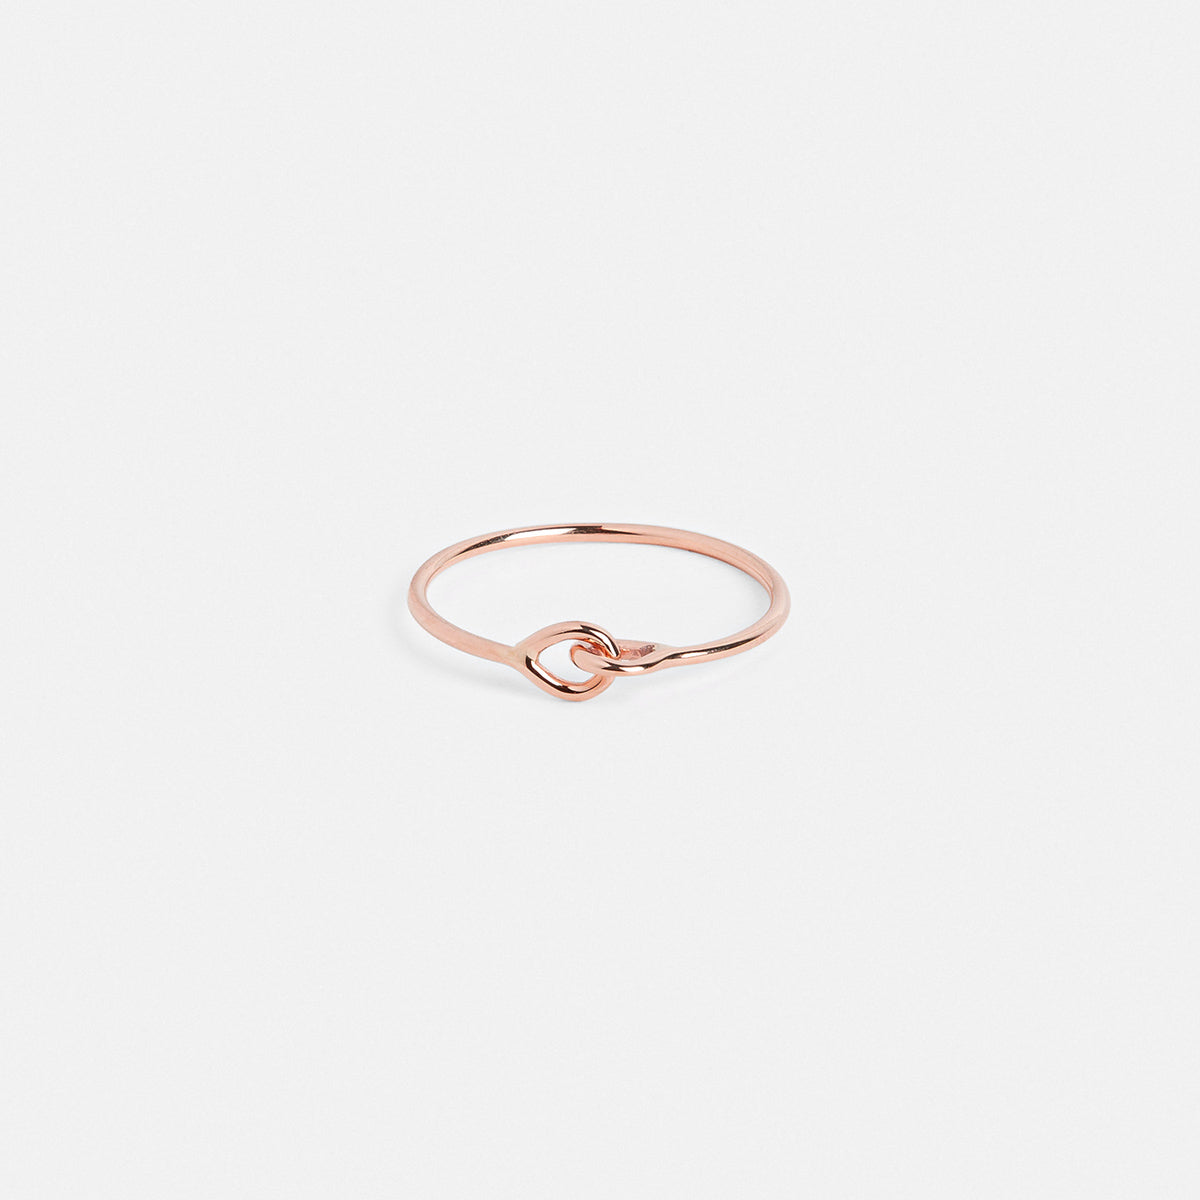 Yra Designer Ring in 14k Rose Gold By SHW Fine Jewelry NYC